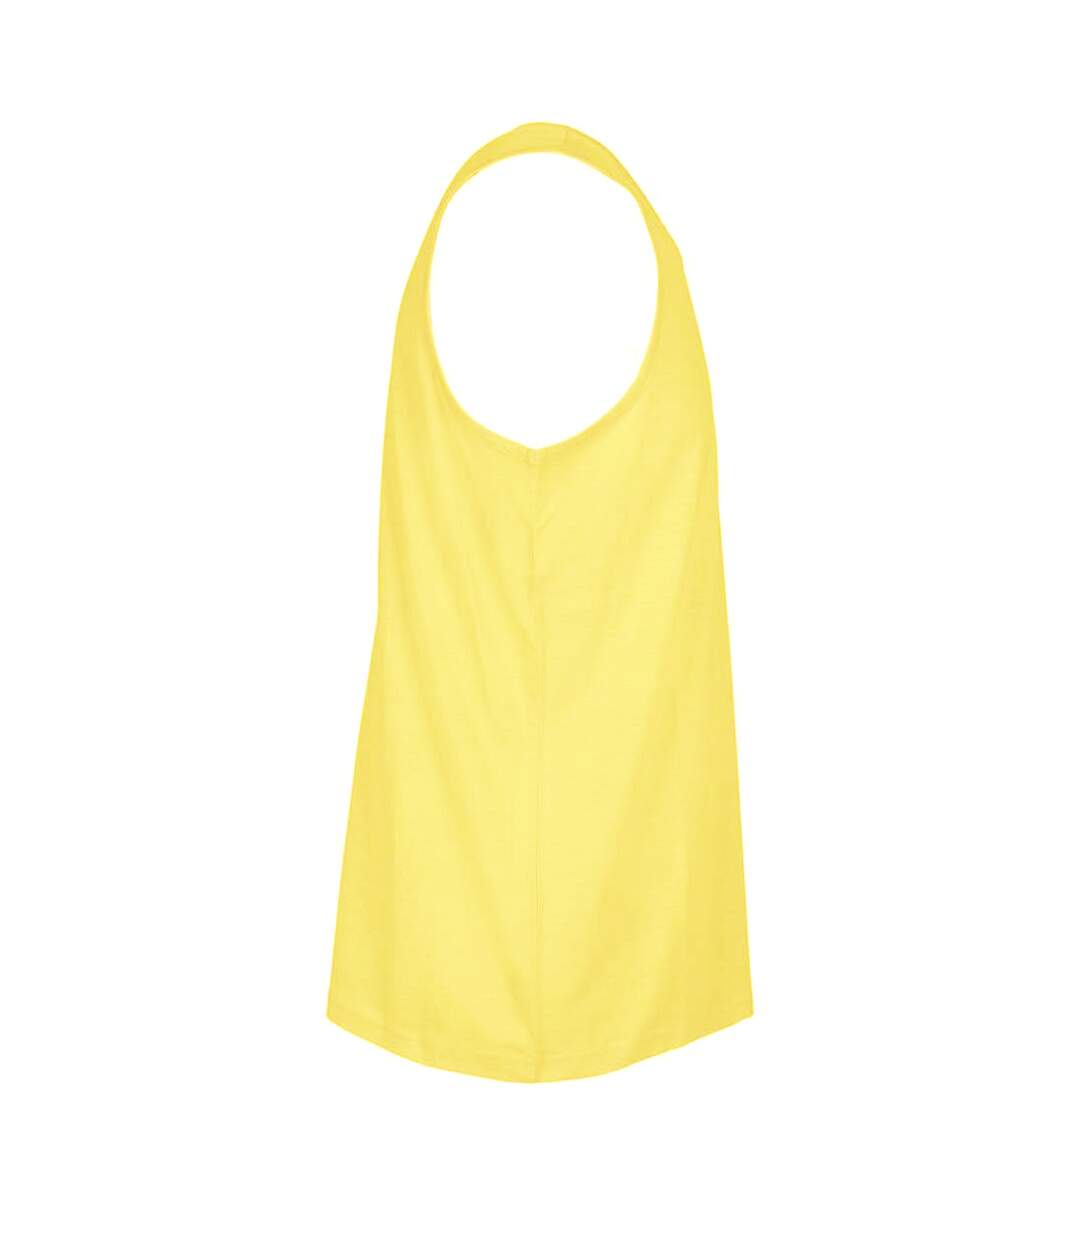 Build Your Brand Mens Basic Tank Top (Yellow)